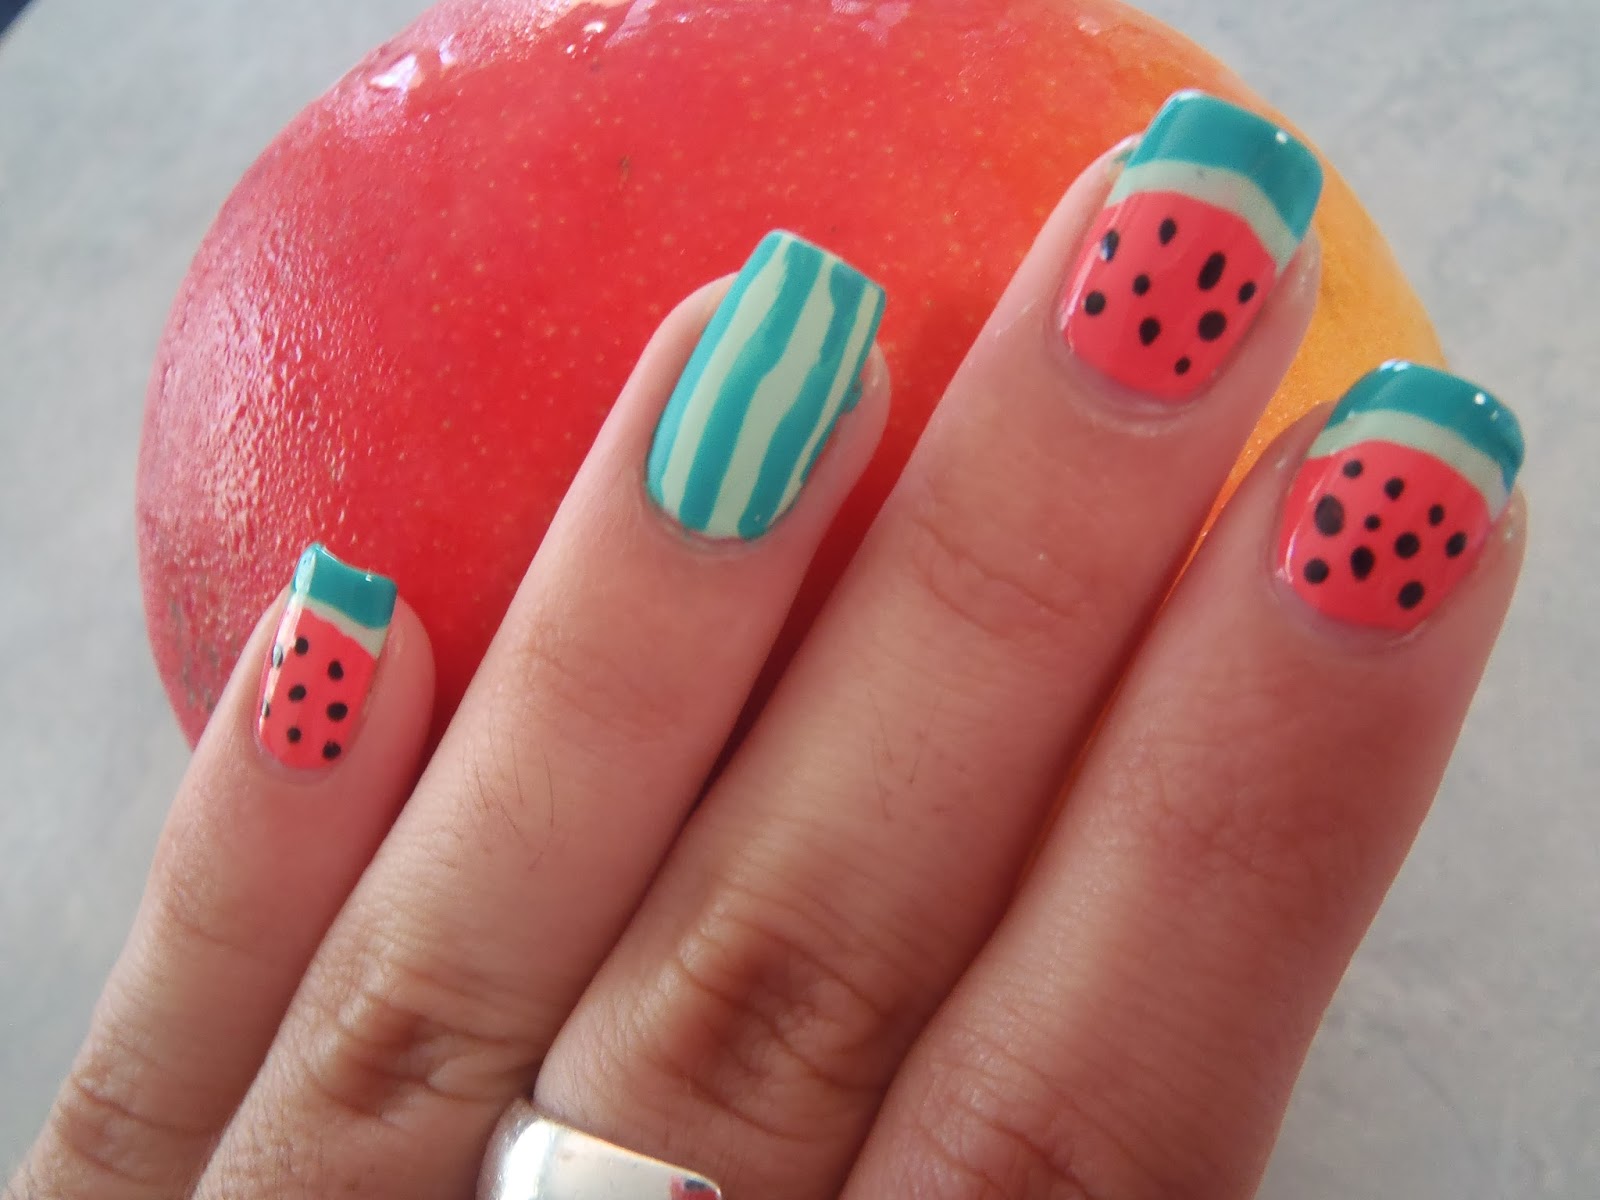 Watermelon Nail Art Tutorial for Short Nails - wide 5